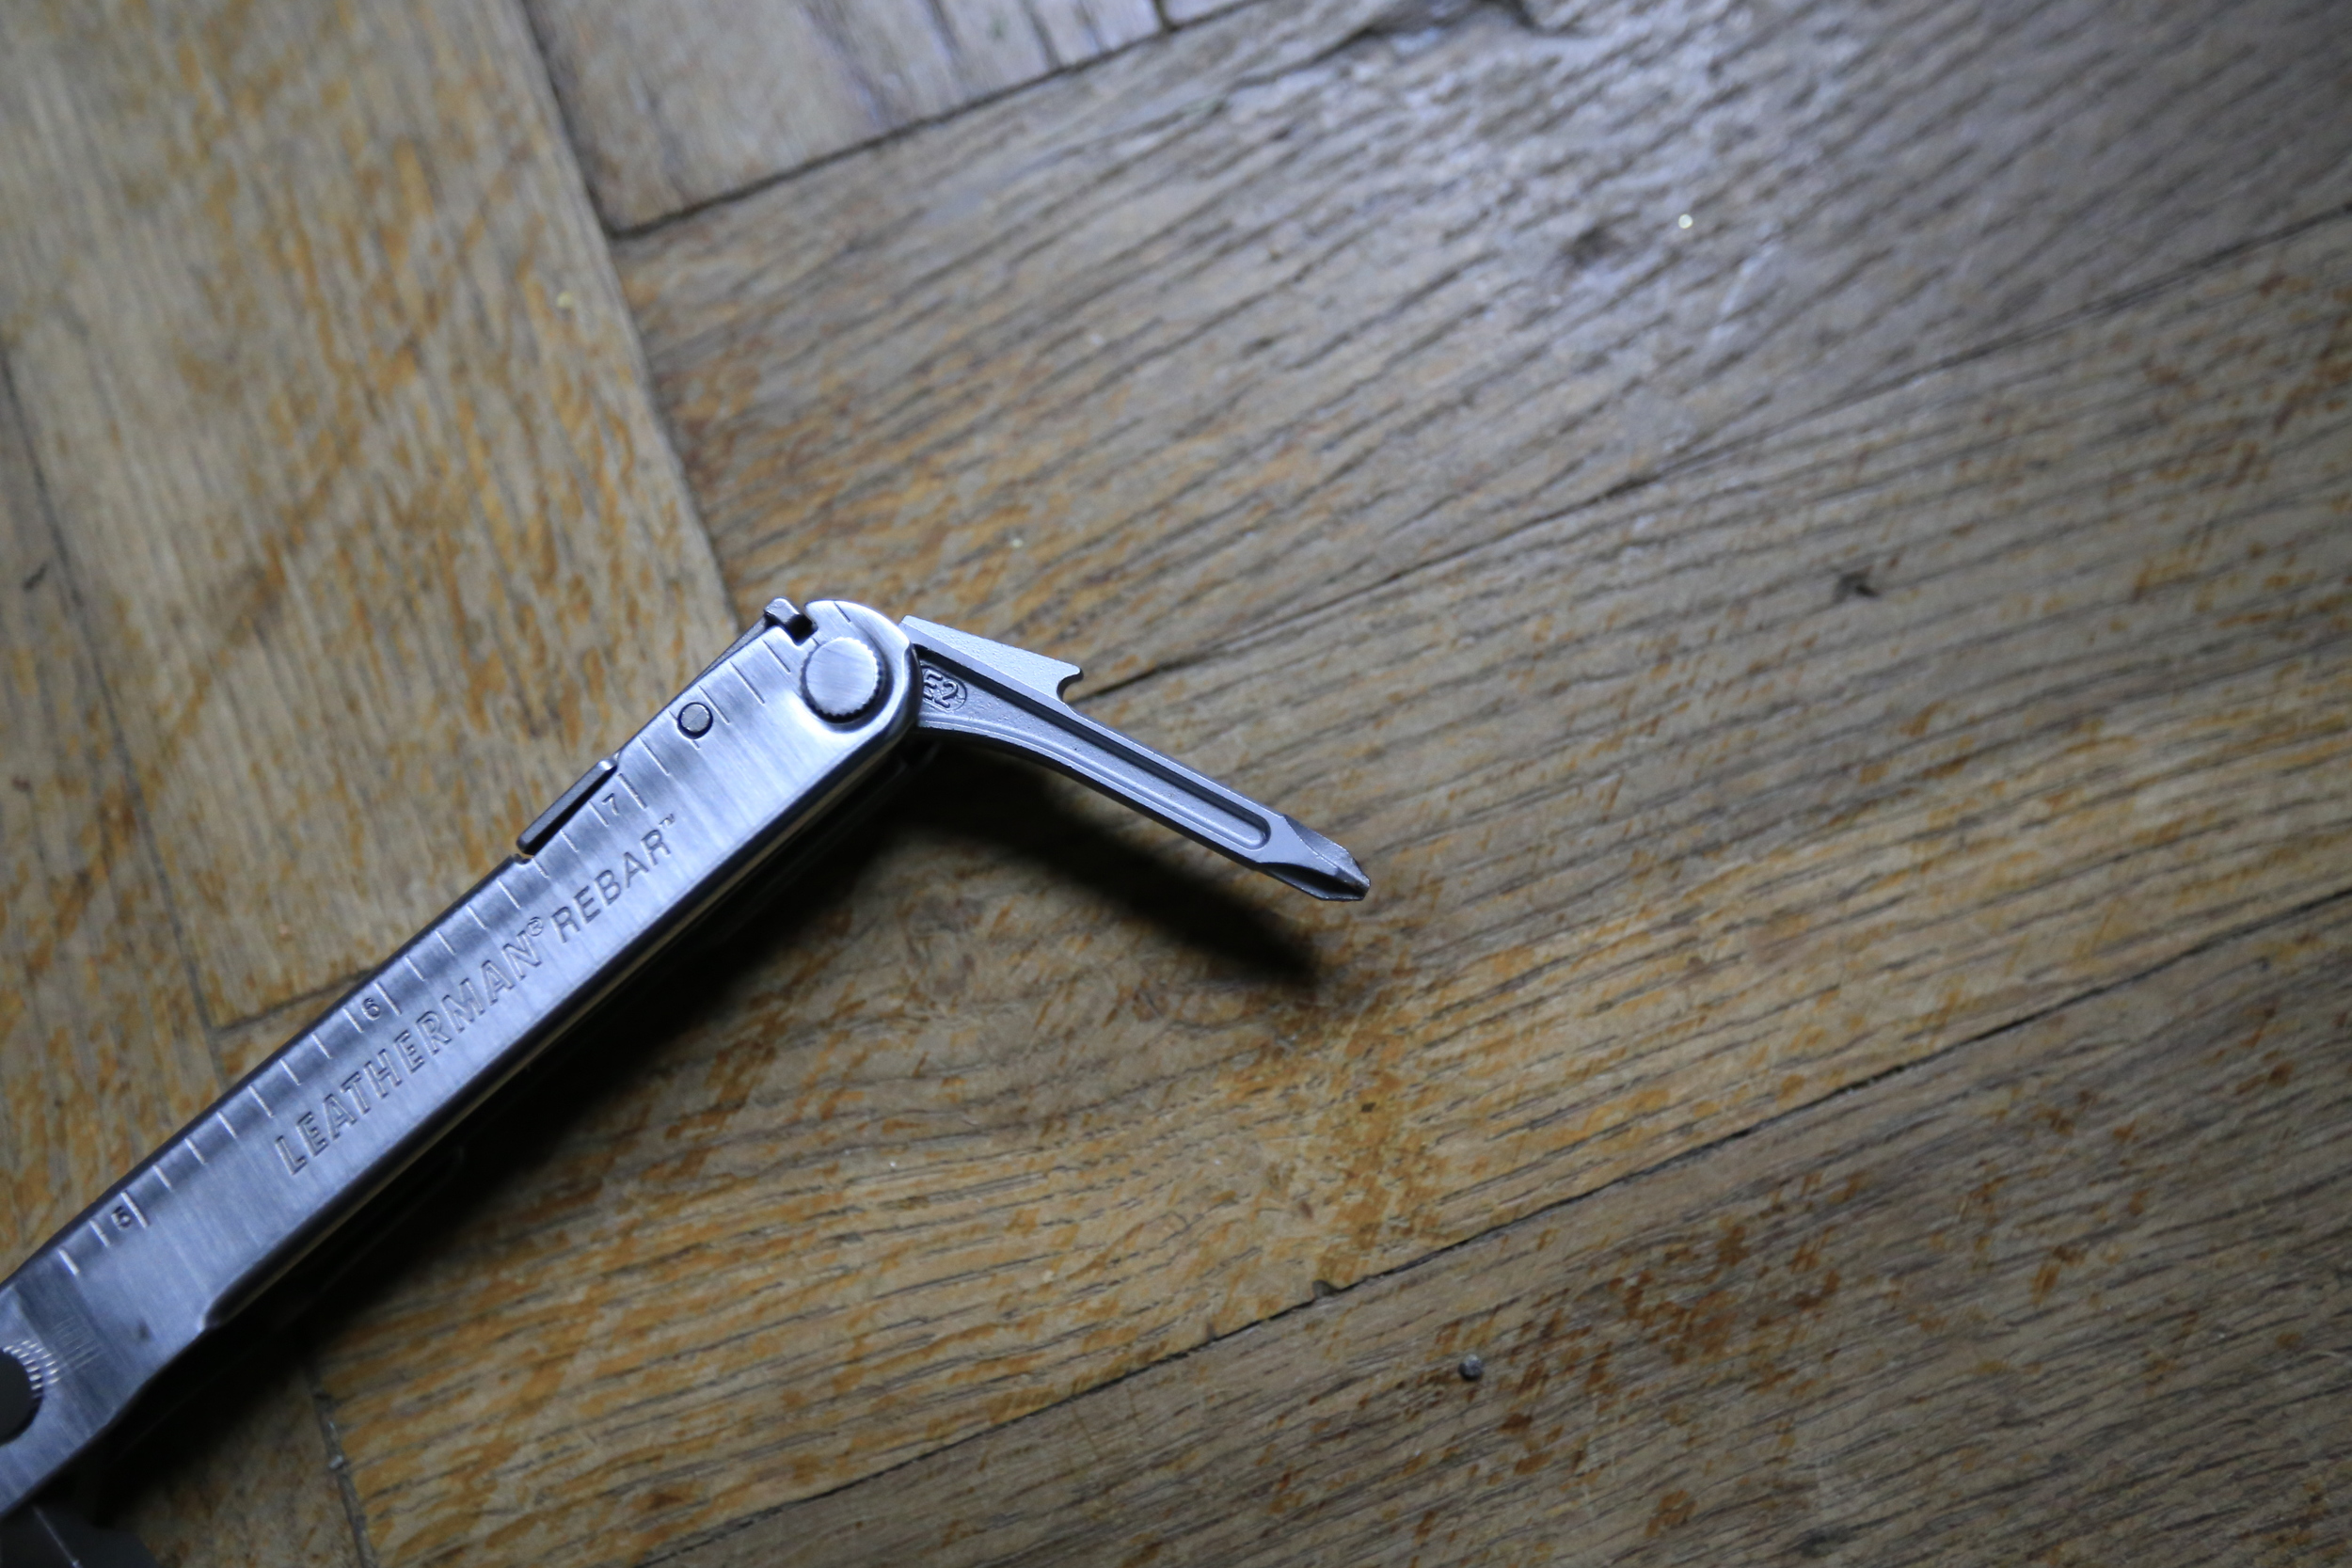 leatherman, leatherman rebar, gear review, cycle gear, bicycle touring apocalypse, travel, cycling, blog, photography, photography blog, mointain bike, bikepacking